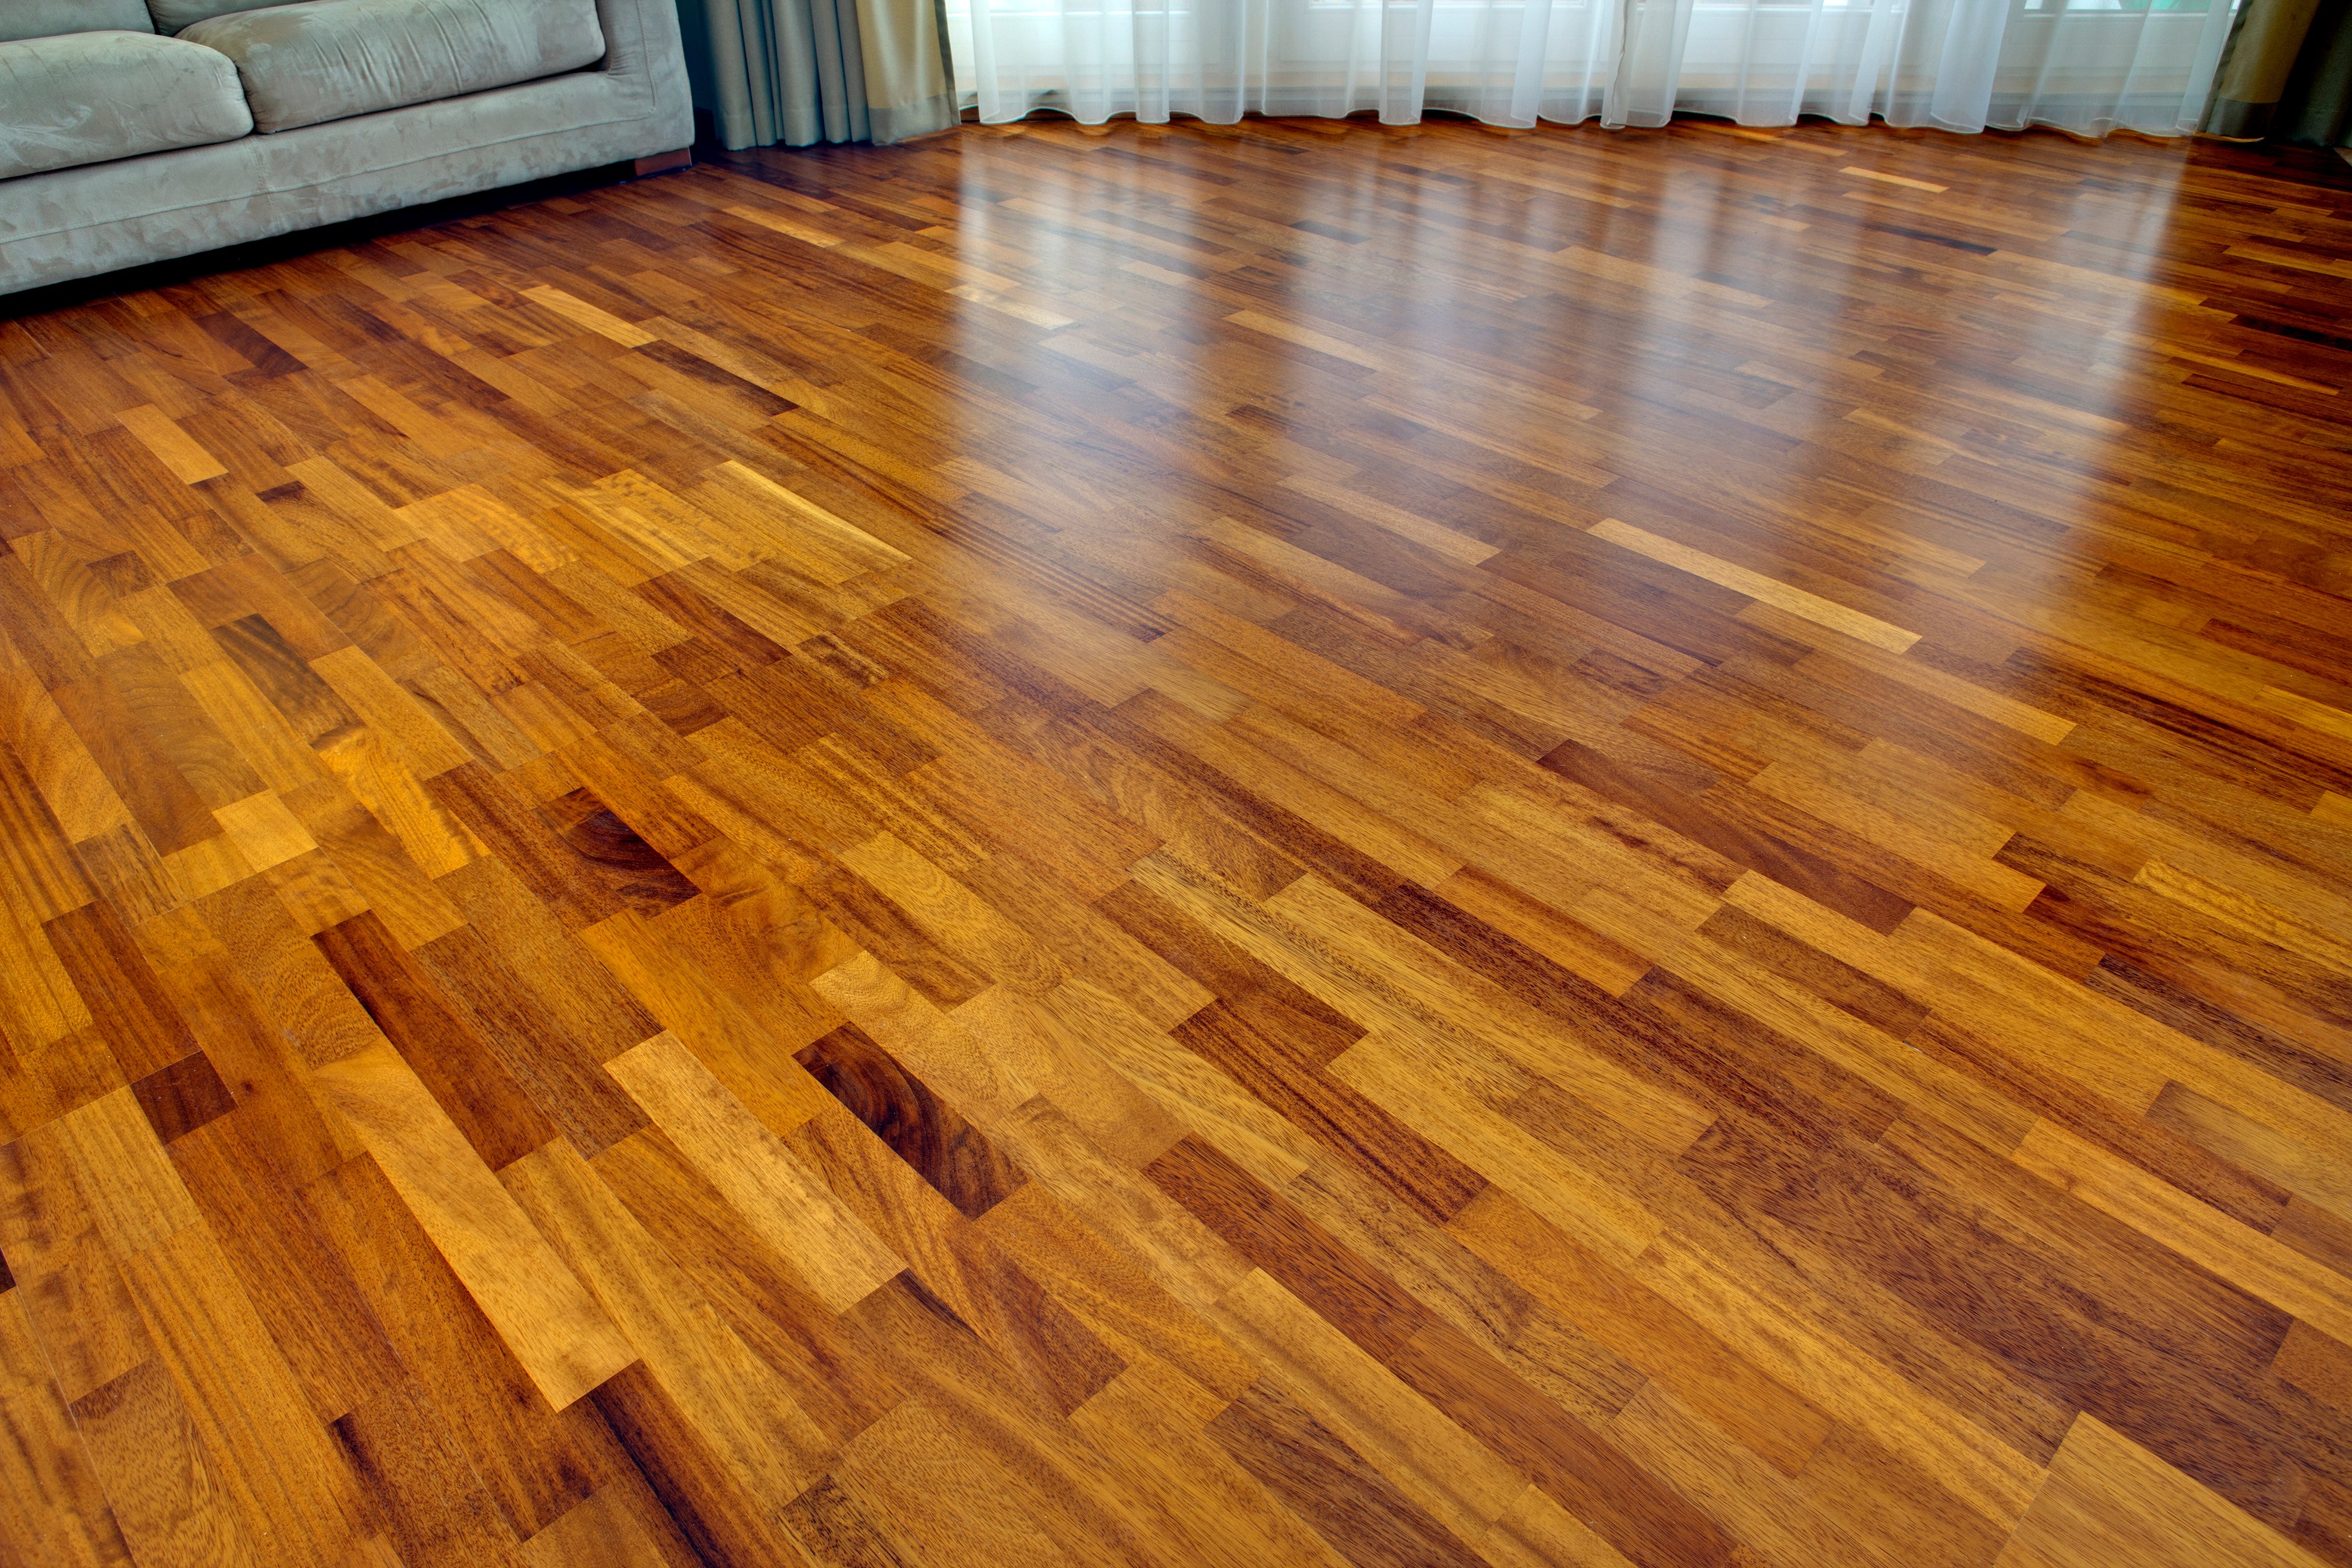 How To Install Hardwood Floors With, Can You Put Electric Radiant Heat Under Hardwood Floors